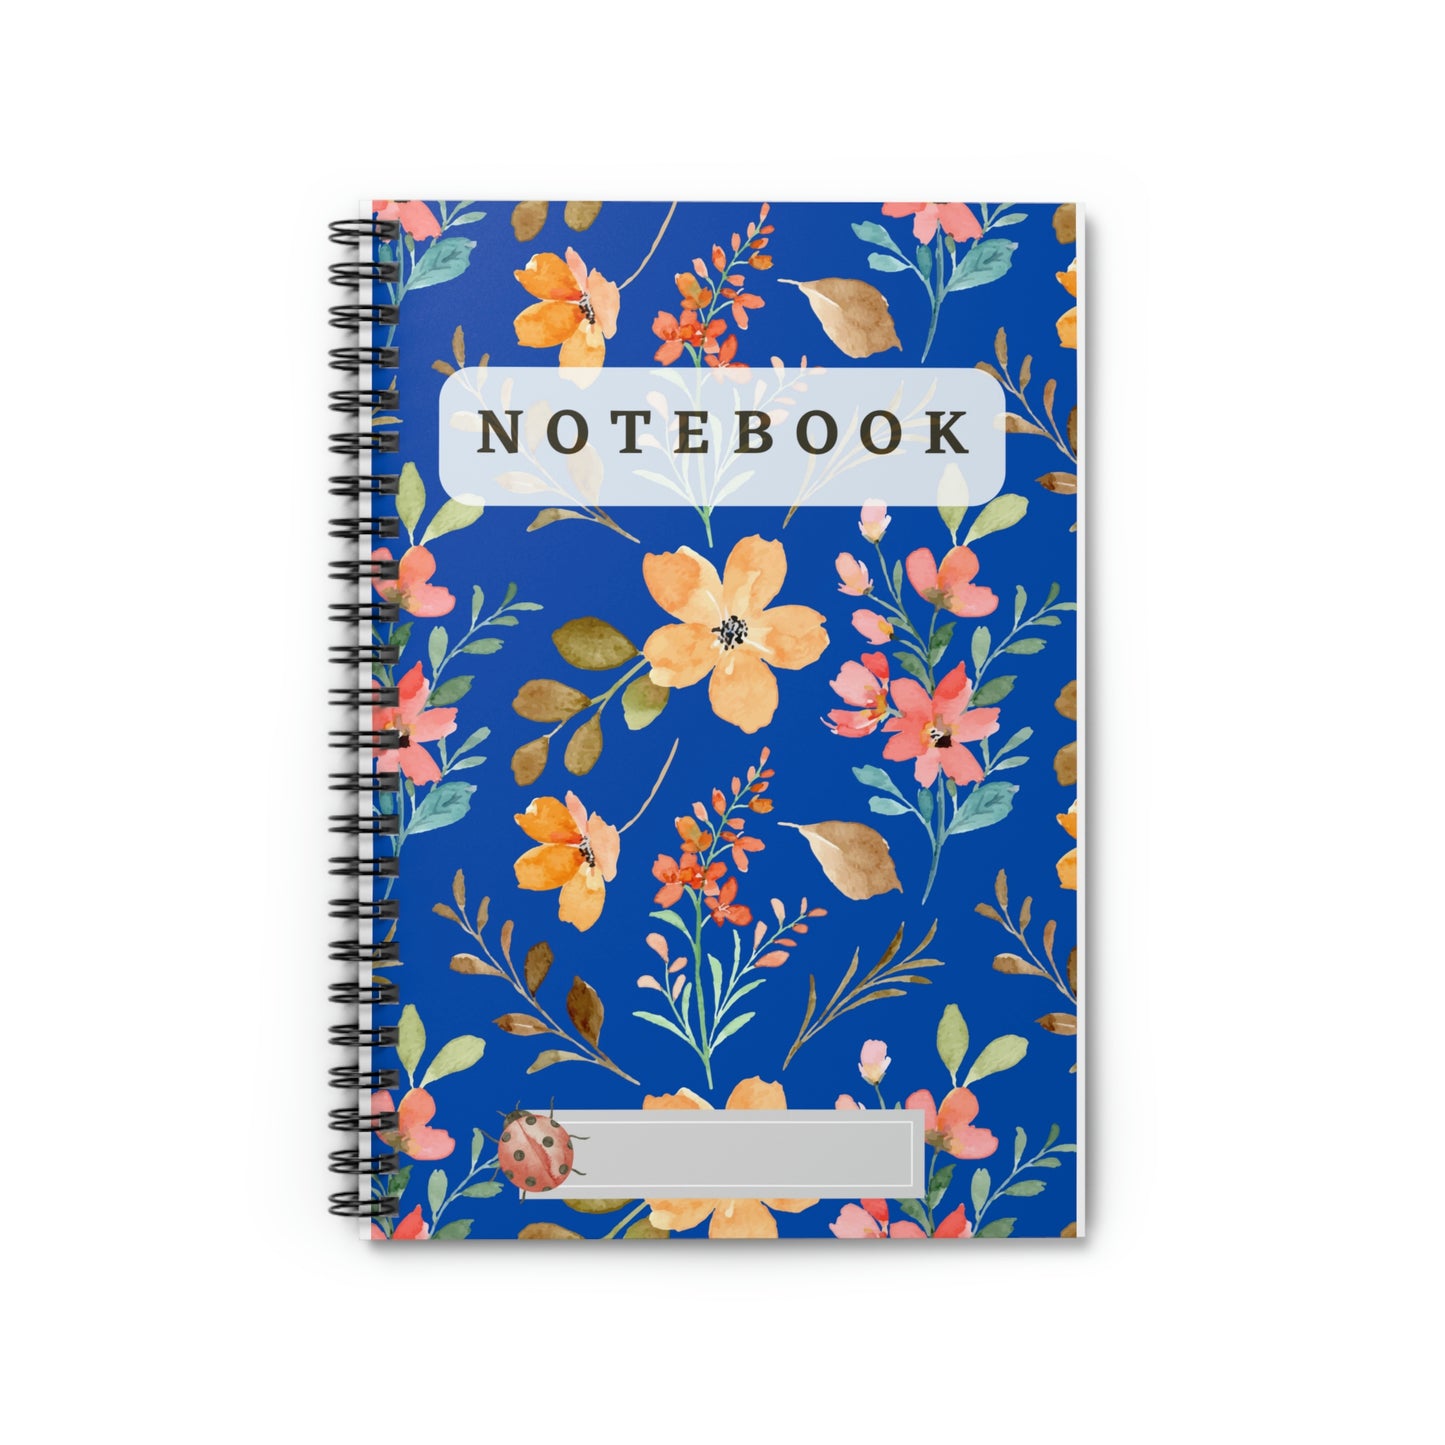 Flower with Lady bug's design (Blue) Spiral Notebook - Ruled Line 118 pages